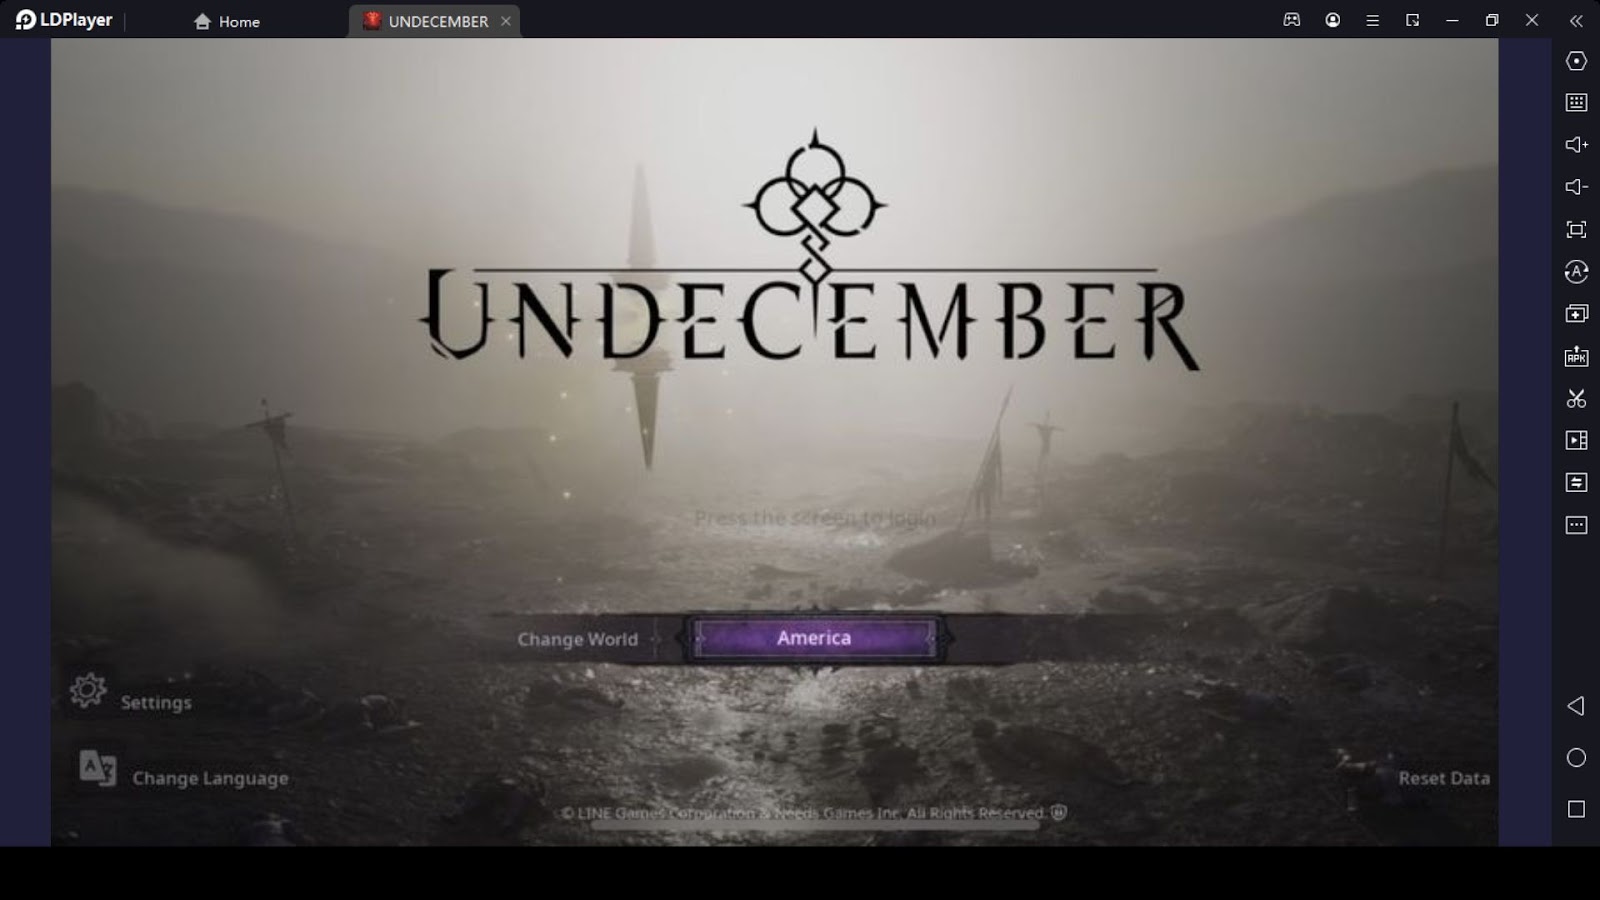 Why You Should Play Undecember